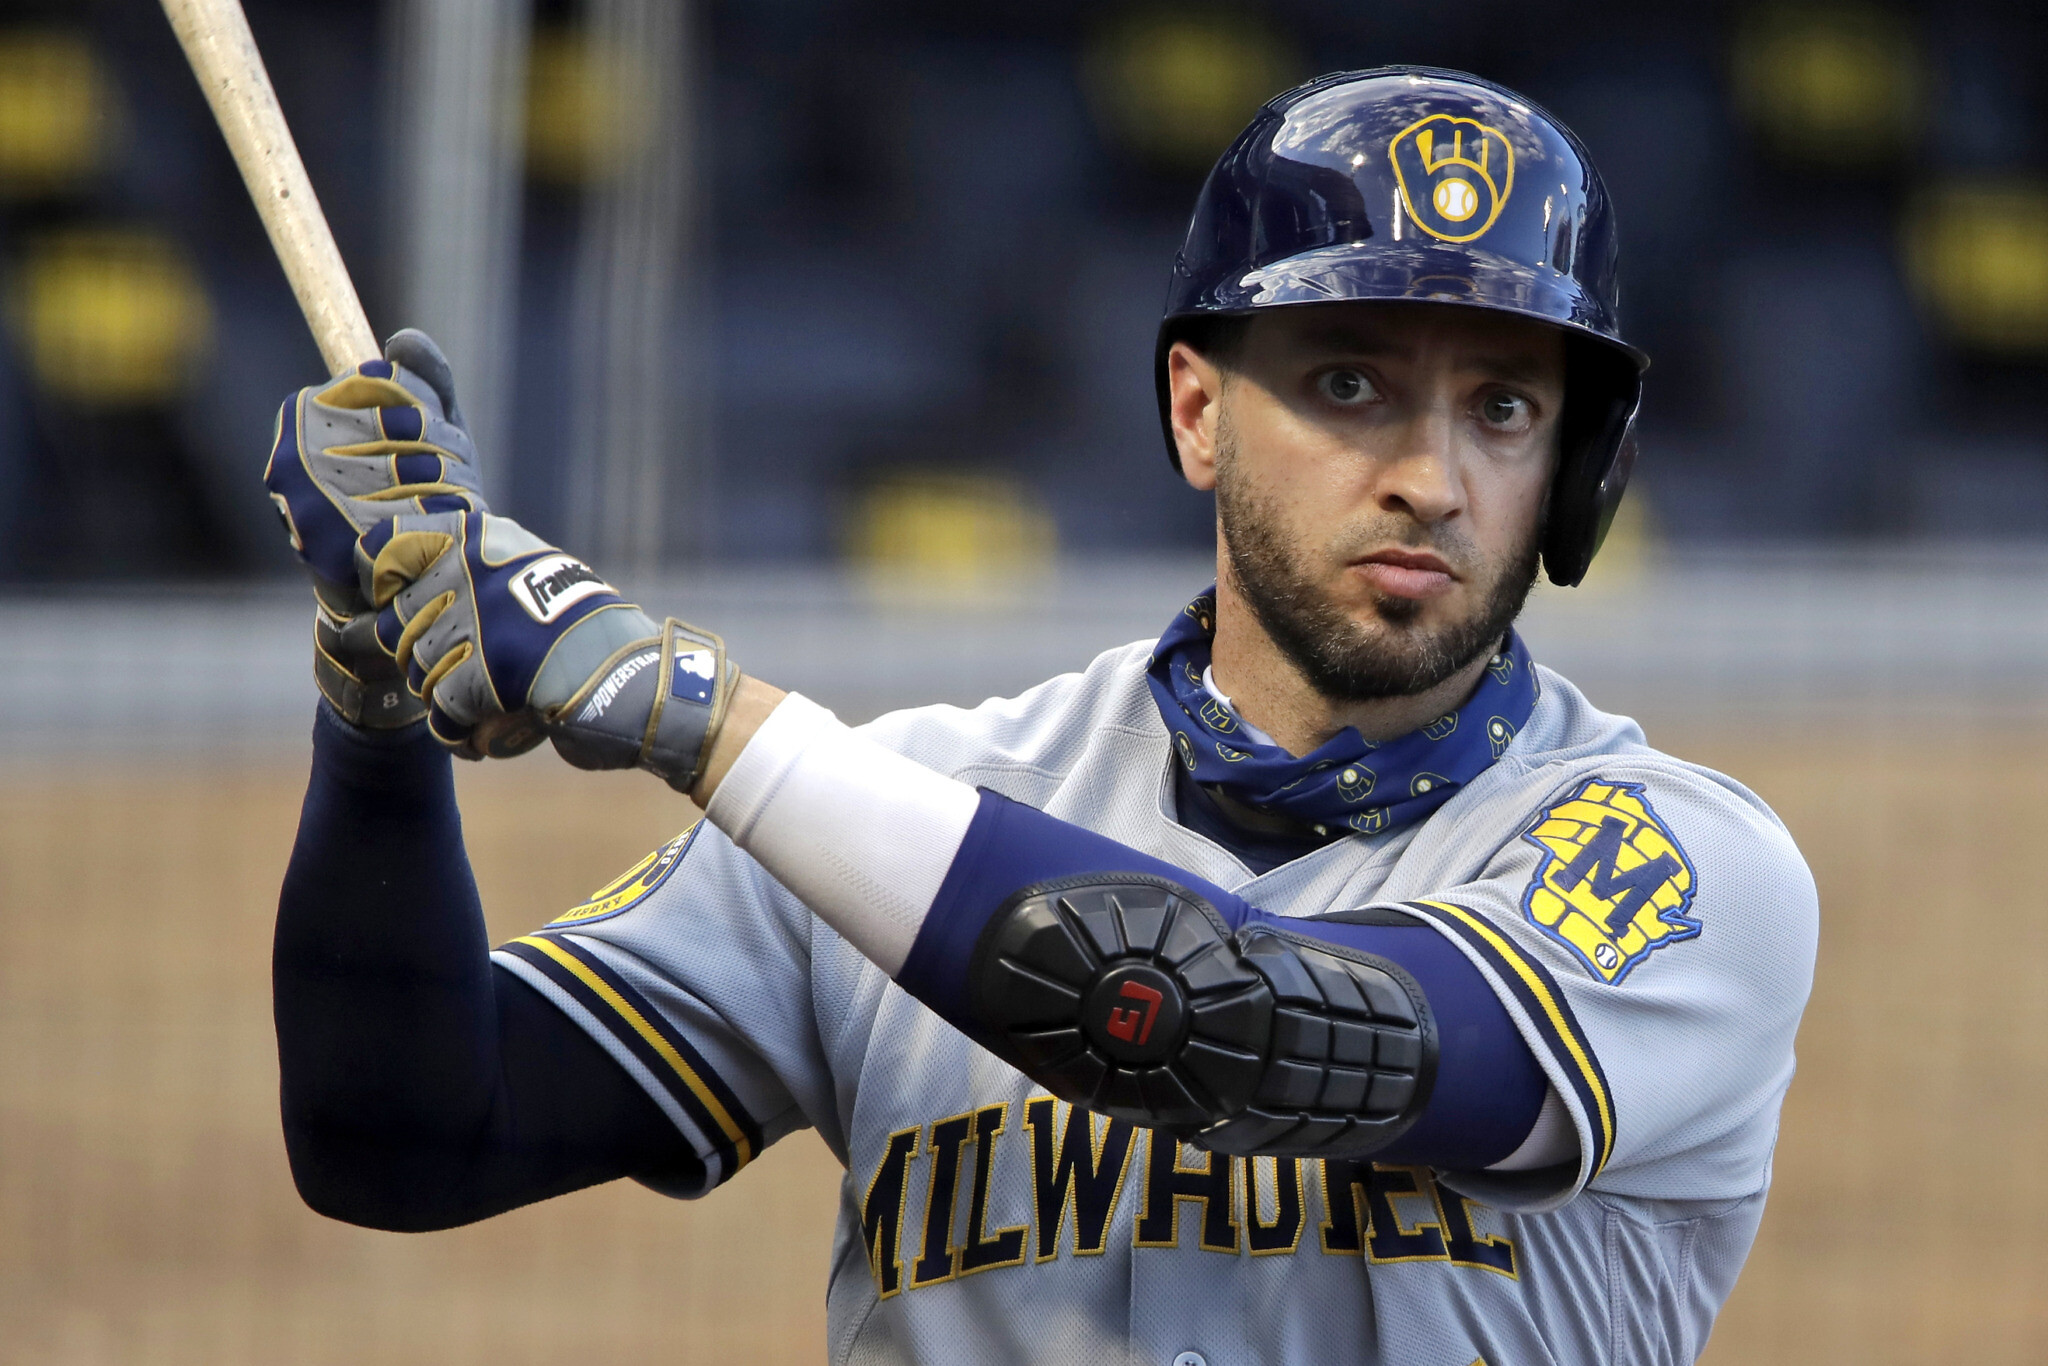 Hebrew Hammer&#39; Ryan Braun retires from MLB after illustrious 14-year career  | The Times of Israel